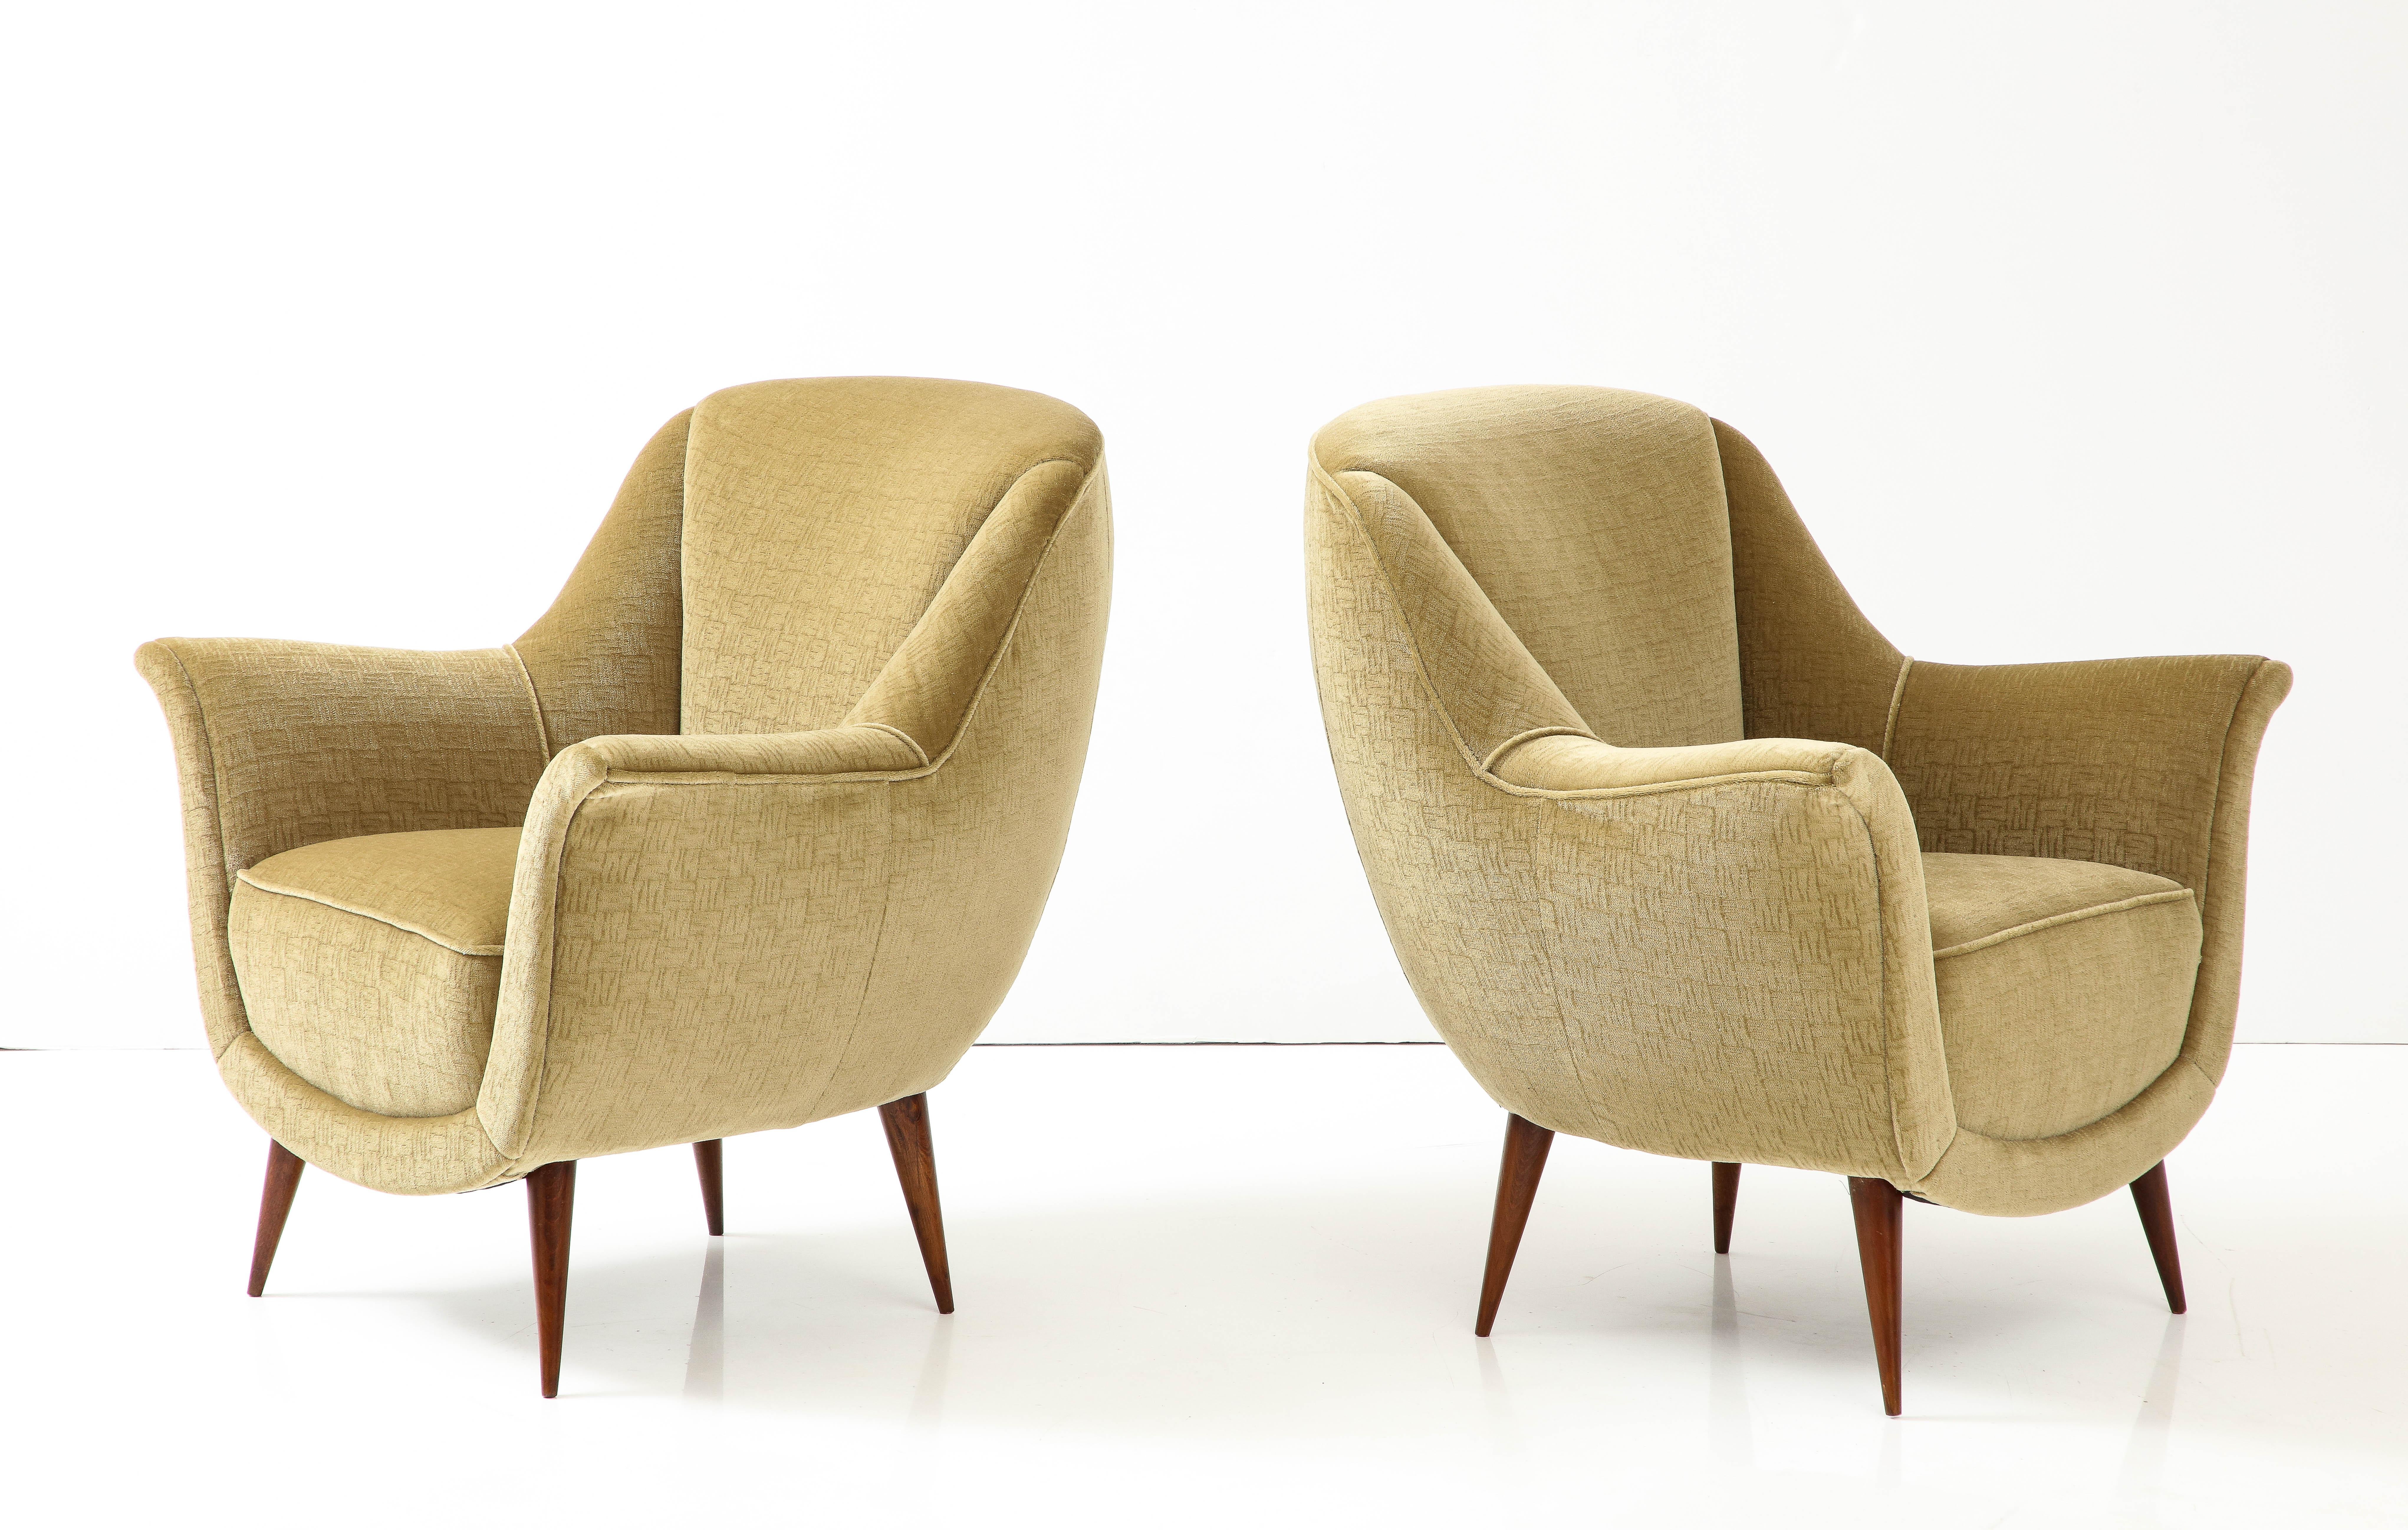 Mid-20th Century 1950's Modernist Gio Ponti Style Italian Lounge Chairs In Mohair Upholstery For Sale